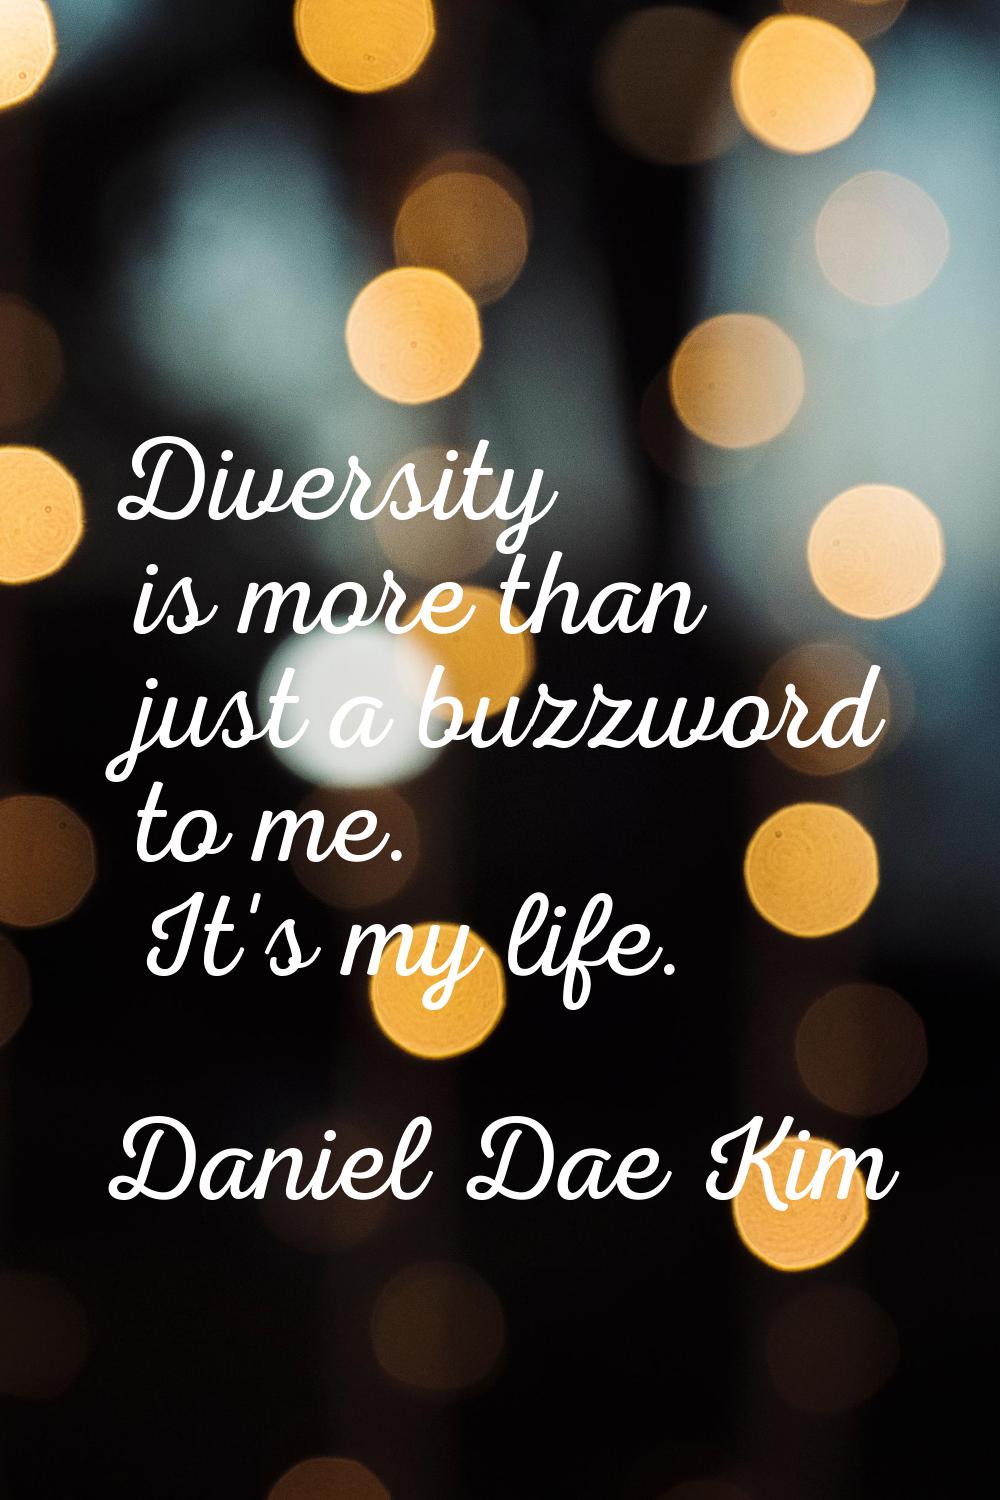 Diversity is more than just a buzzword to me. It's my life.